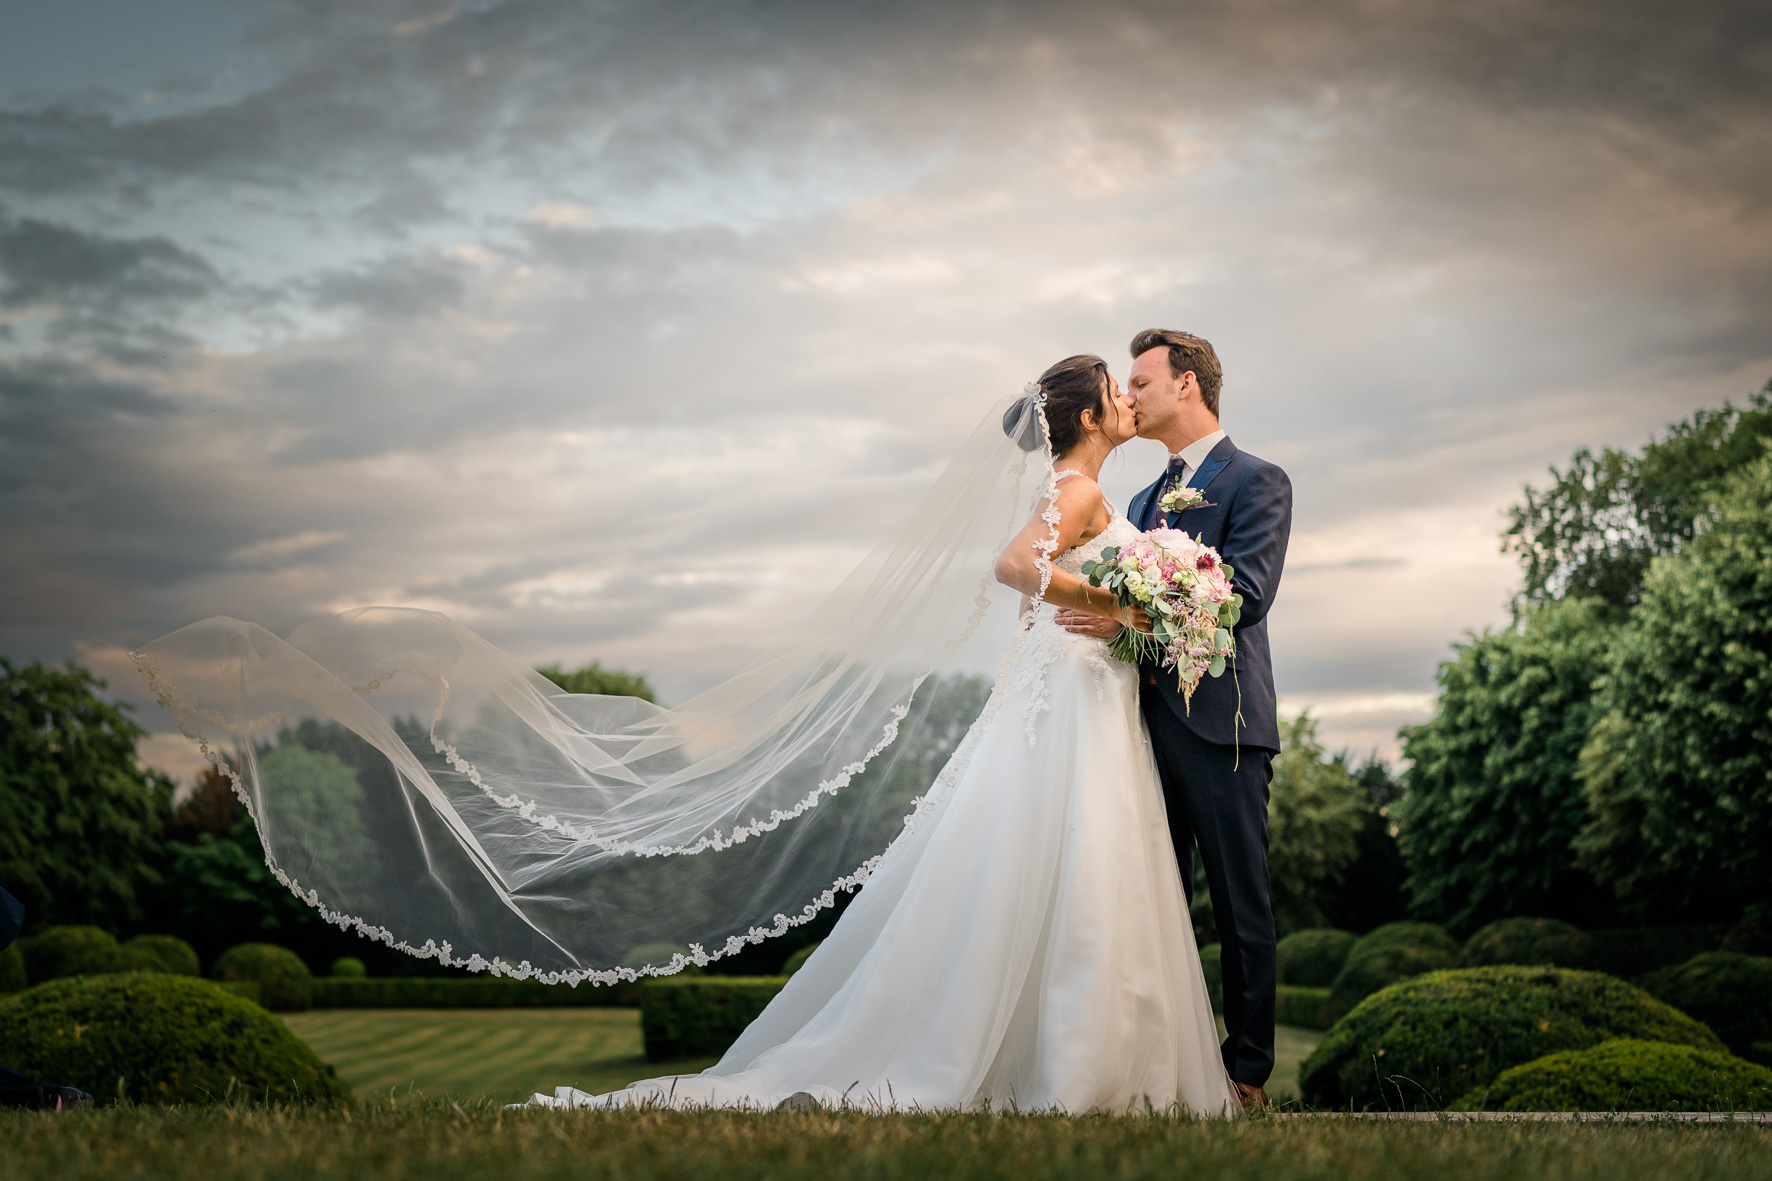 Bride and Groom sharing a romantic kiss as the sun sets